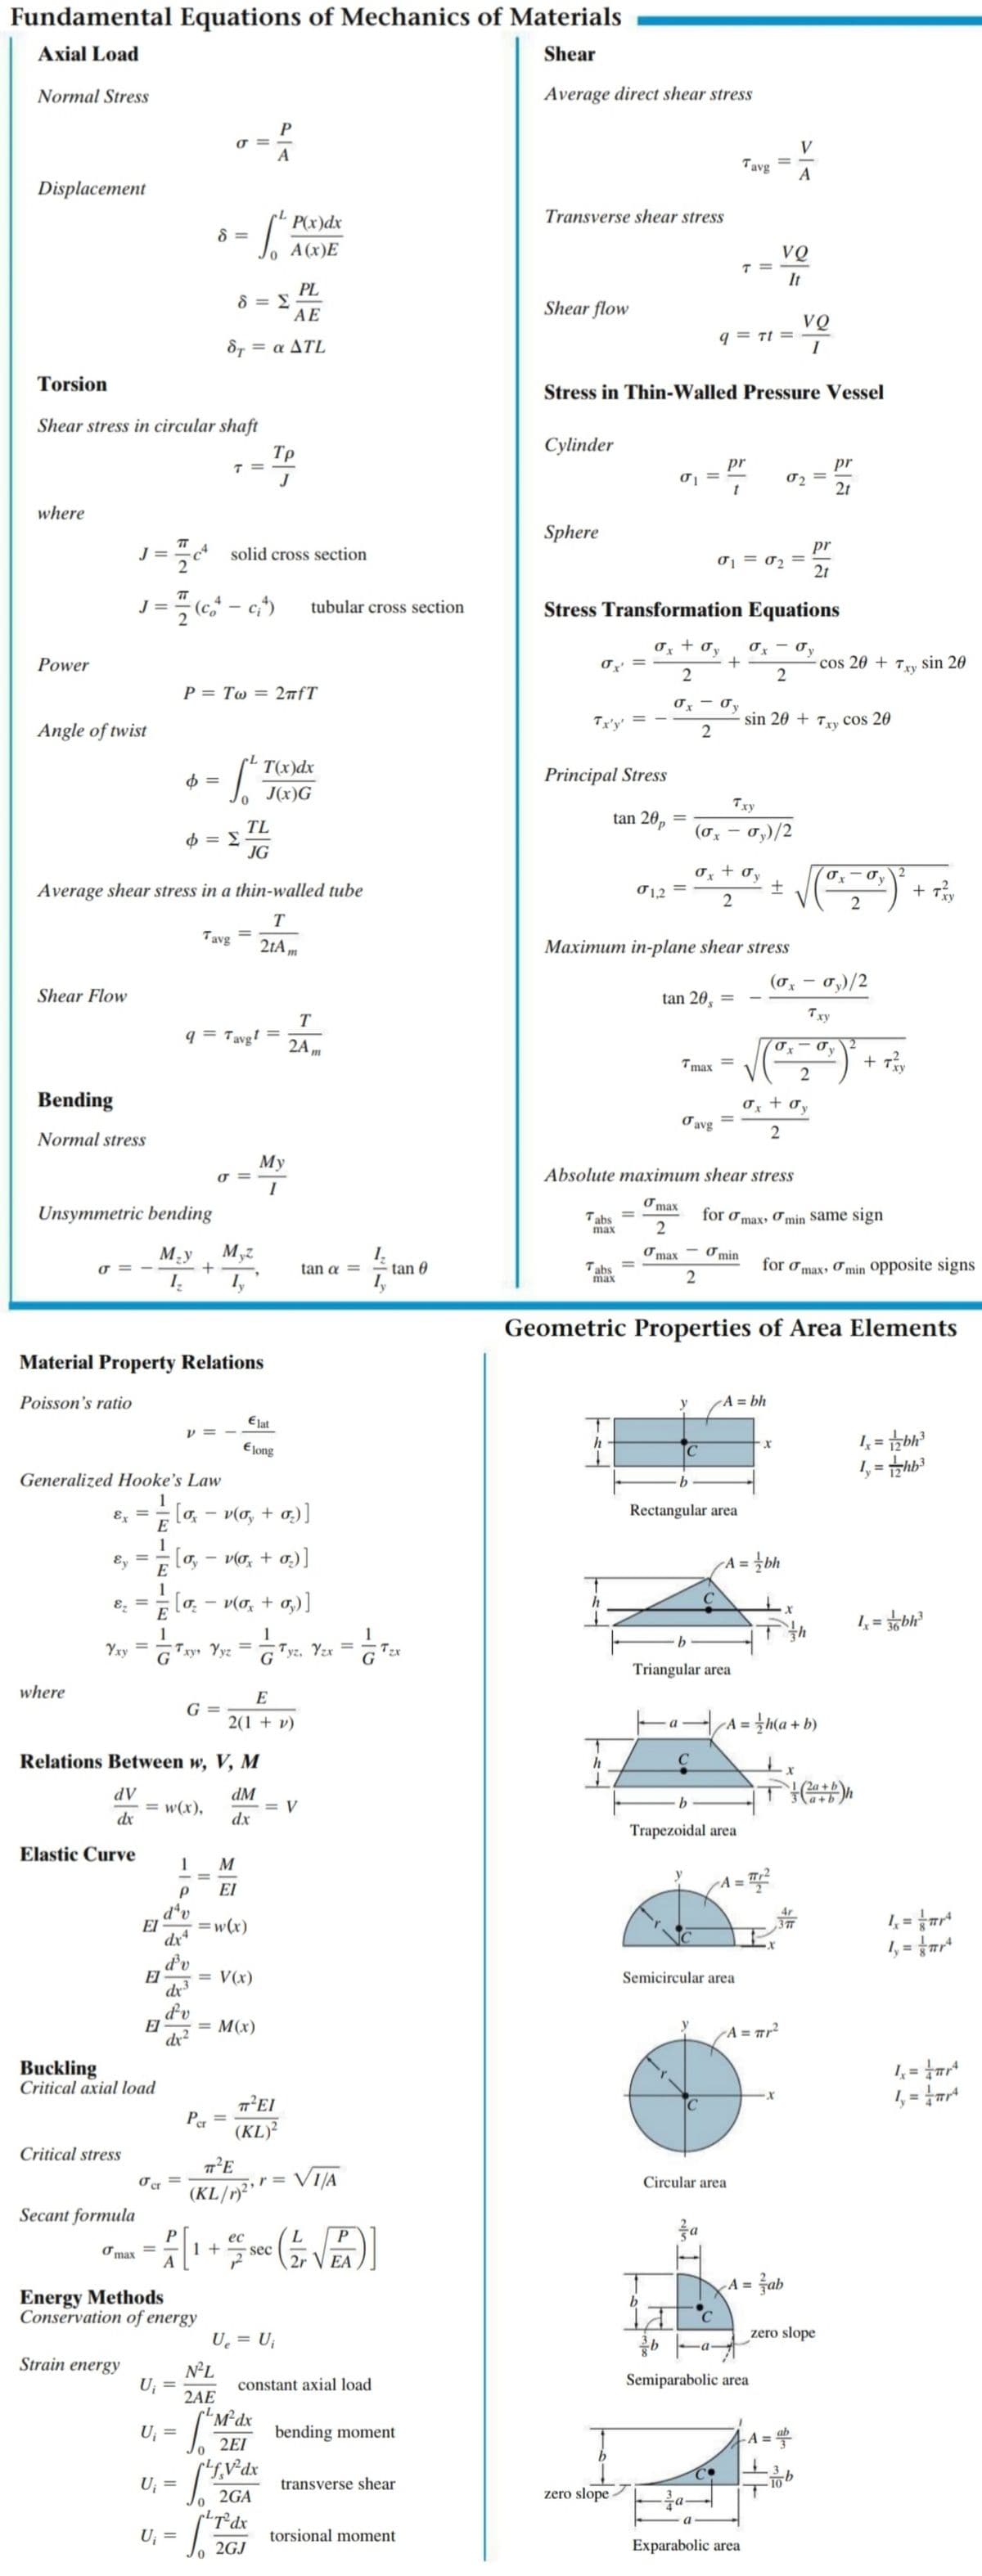 Fundamental Equations of Mechanics of Materials
Axial Load
Shear
Normal Stress
Average direct shear stress
V
A
Tavg
A
Displacement
P(x)dx
Transverse shear stress
8 =
A (x)E
VQ
It
PL
AE
Shear flow
VQ
q = Tt =
δ- α ΔΤL
= a
Torsion
Stress in Thin-Walled Pressure Vessel
Shear stress in circular shaft
Тр
Cylinder
pr
pr
2t
where
Sphere
pr
= solid cross section
01 = 02 =
2t
J =
- (c,“ – c,")
Stress Transformation Equations
tubular cross section
0x + 0y
O, – 0,
+
y
cos 20 +
Power
sin 20
2
P = Tw = 2™fT
Ox – 0y
Angle of twist
sin 20 + Try cos 20
2
T(x)dx
Principal Stress
J(x)G
Txy
tan 26,
TL
$ = E
JG
(ox – 0,)/2
Ox + 0y
1,2
0,- 0,
y
Average shear stress in a thin-walled tube
+ Tây
2
T
Tavg
21A m
Maximum in-plane shear stress
(0, – 0,)/2
Shear Flow
tan 20,
T
Txy
q = Tavg!
2A m
Tmax
+ Txy
2
Bending
Ox + 0y
O avg
Normal stress
Мy
Absolute maximum shear stress
I
σ.
max
Unsymmetric bending
Tabs
max
for ởmax, O min same sign
2
Mạy
max
Ở min
tan a
Tabs
max
for omax, Omin Opposite signs
tan 0
2
Geometric Properties of Area Elements
Material Property Relations
Poisson's ratio
-A = bh
Elat
1, = bh
!, = hb
long
C
%3D
Generalized Hooke's Law
:[0, - vo, + o.)]
Rectangular area
%3D
Ex
E
[0, – v(o, + 0,)]
-A = bh
E
Ez
[0. - v(0, + 0,)]
E
1
Tyz, Yzx
1
%3D
Yxy
Txy Yyz
Triangular area
where
E
G =
2(1 + v)
A =
a
(9 + D)w :
Relations Between w, V, M
h
(2a + b\
a + b
dM
= V
dx
dV
b
w(x),
dx
Trapezoidal area
Elastic Curve
1
M
-A =
EI
d*v
EI
=w(x)
!, = }ar*
%3D
d'v
El
= V(x)
Semicircular area
dv
El
dx?
M(x)
-A = Tr²
Buckling
Critical axial load
1, = fart
!, = fart
T²EI
Per
(KL)²
Critical stress
VIJA
O cr
Circular area
(KL/r)²*
Secant formula
ес
P
Ở max
1 +
sec
A
V EA
žab
A =
Energy Methods
Conservation of energy
U. = U;
zero slope
Strain energy
N²L
Semiparabolic area
U; =
2AE
constant axial load
"M²dx
U, =
bending moment
%3D
2EI
A =
U; =
transverse shear
%3D
2GA
zero slope -
pLT°dx
torsional moment
%3D
2GJ
Exparabolic area
